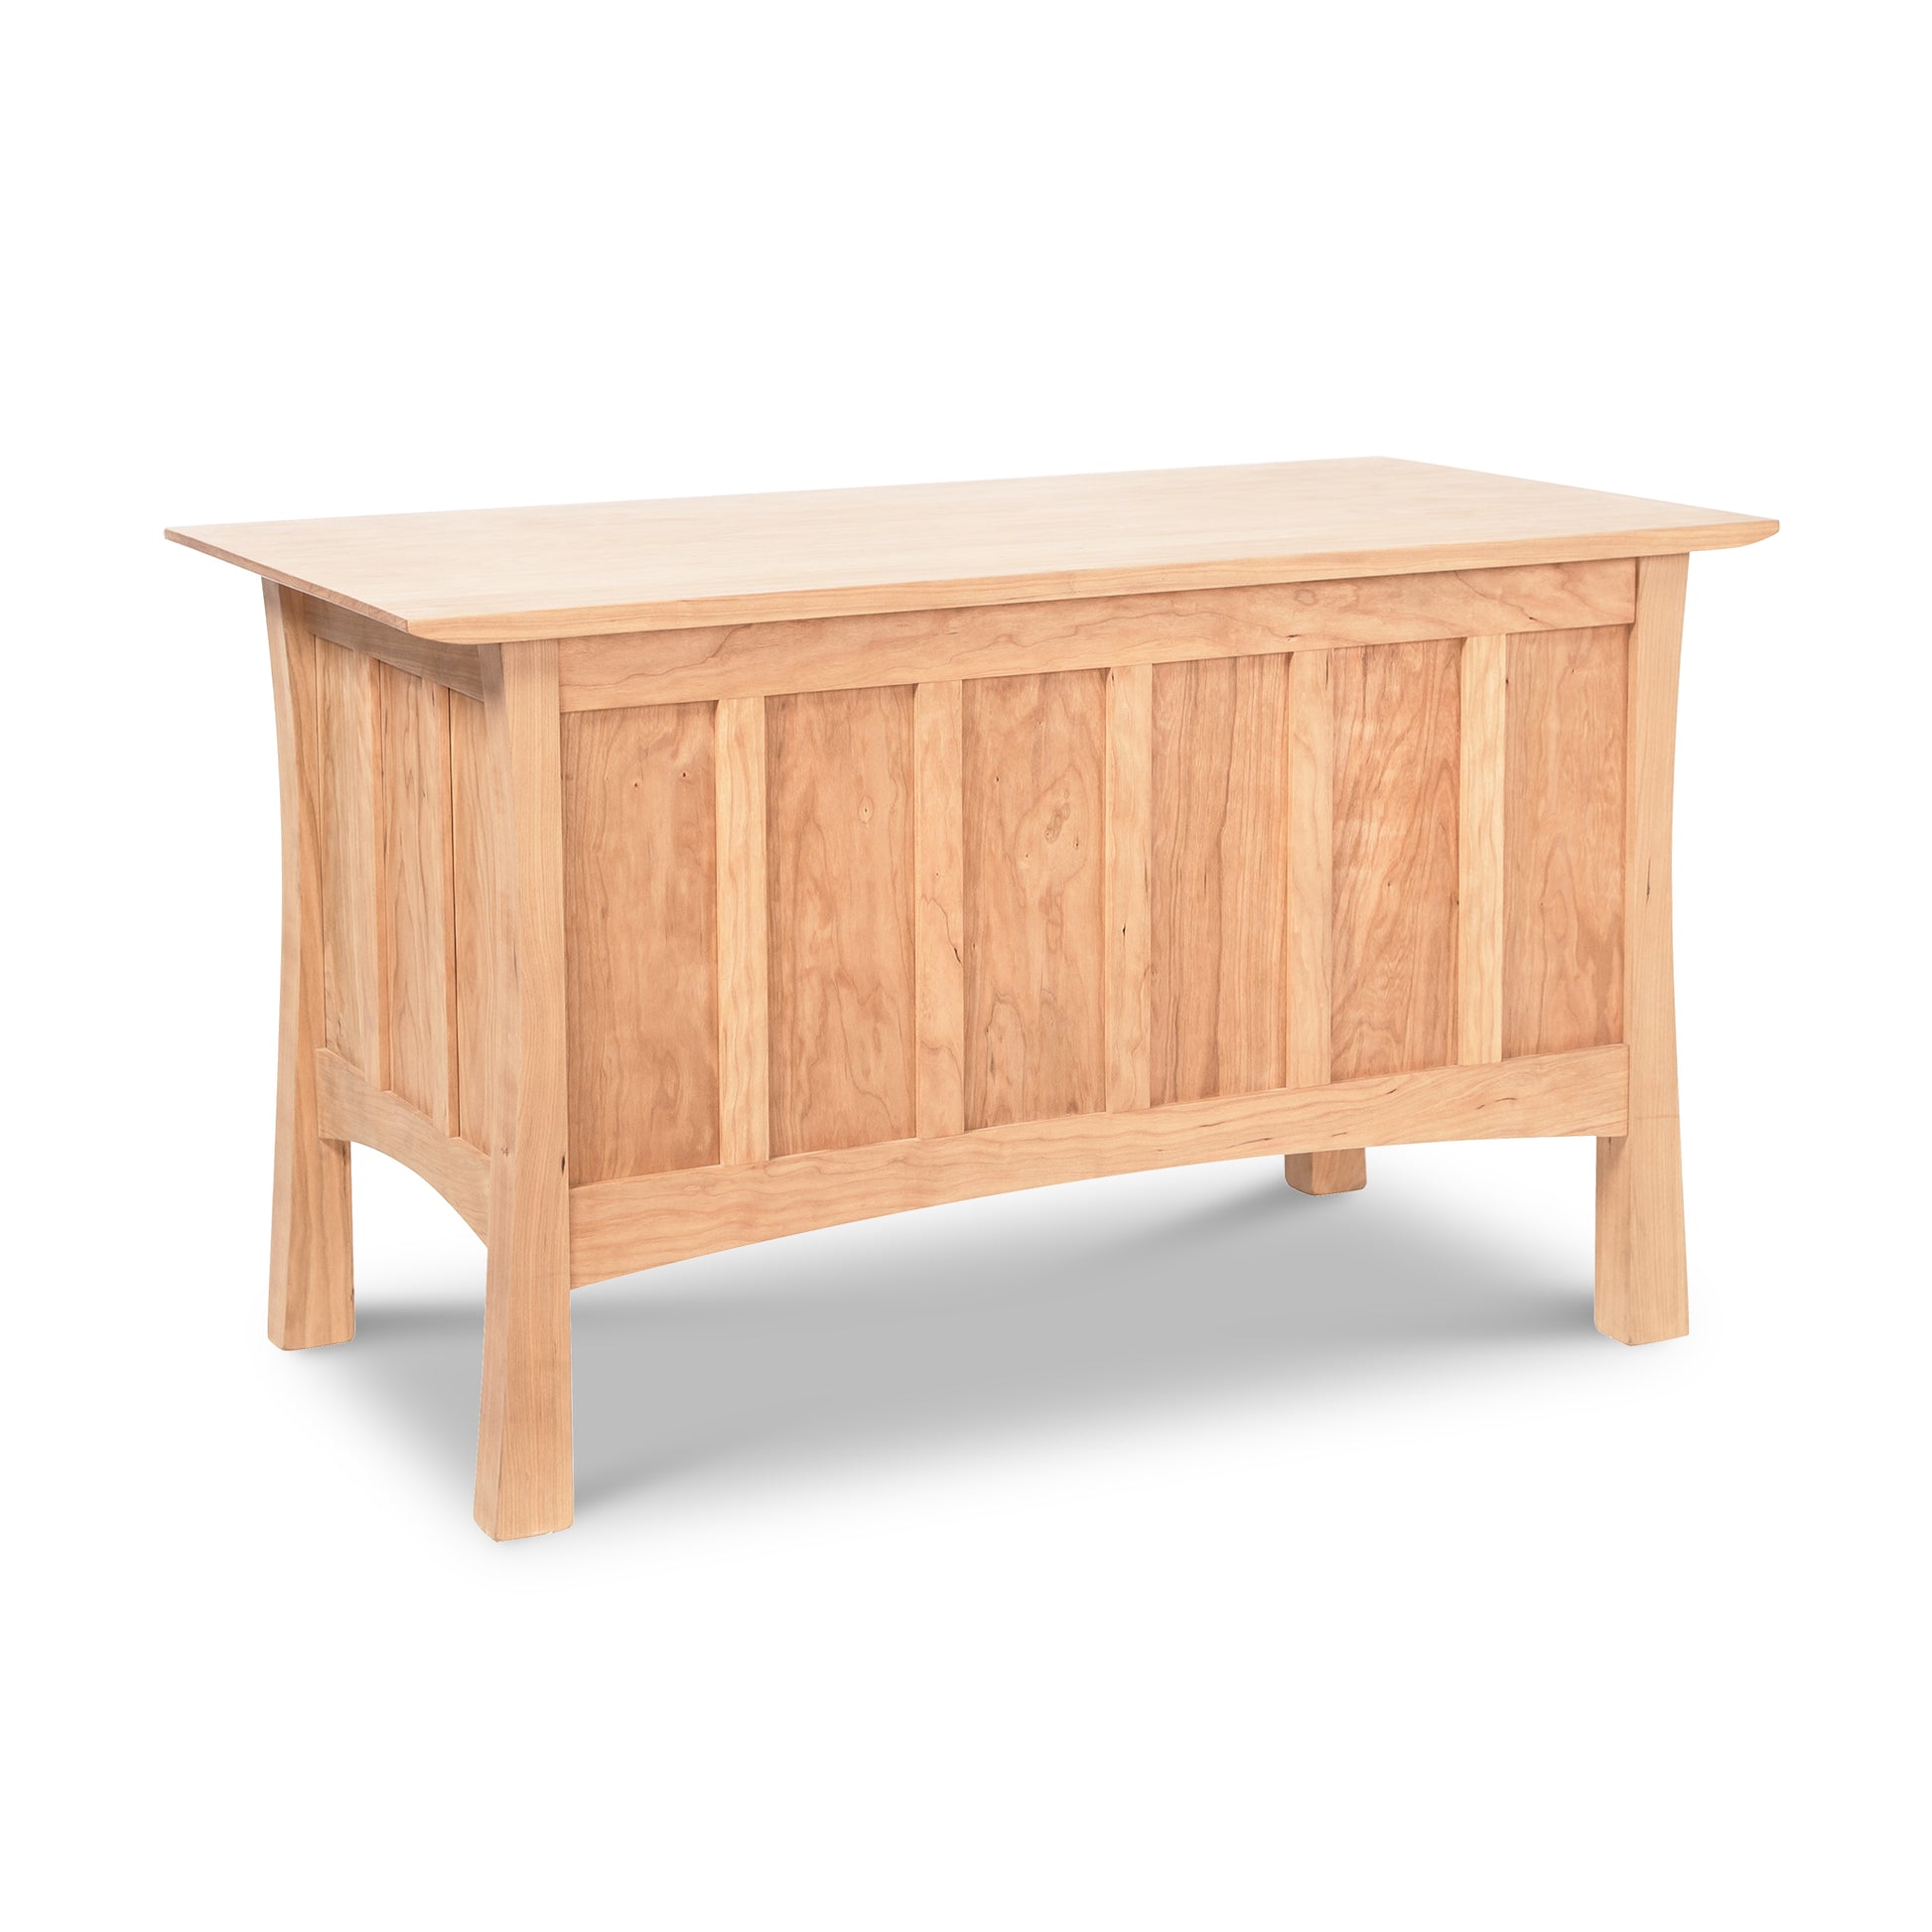 A Vermont Furniture Designs Contemporary Craftsman Blanket Chest with a hinged lid, featuring panel detailing and a light natural finish, isolated on a white background.